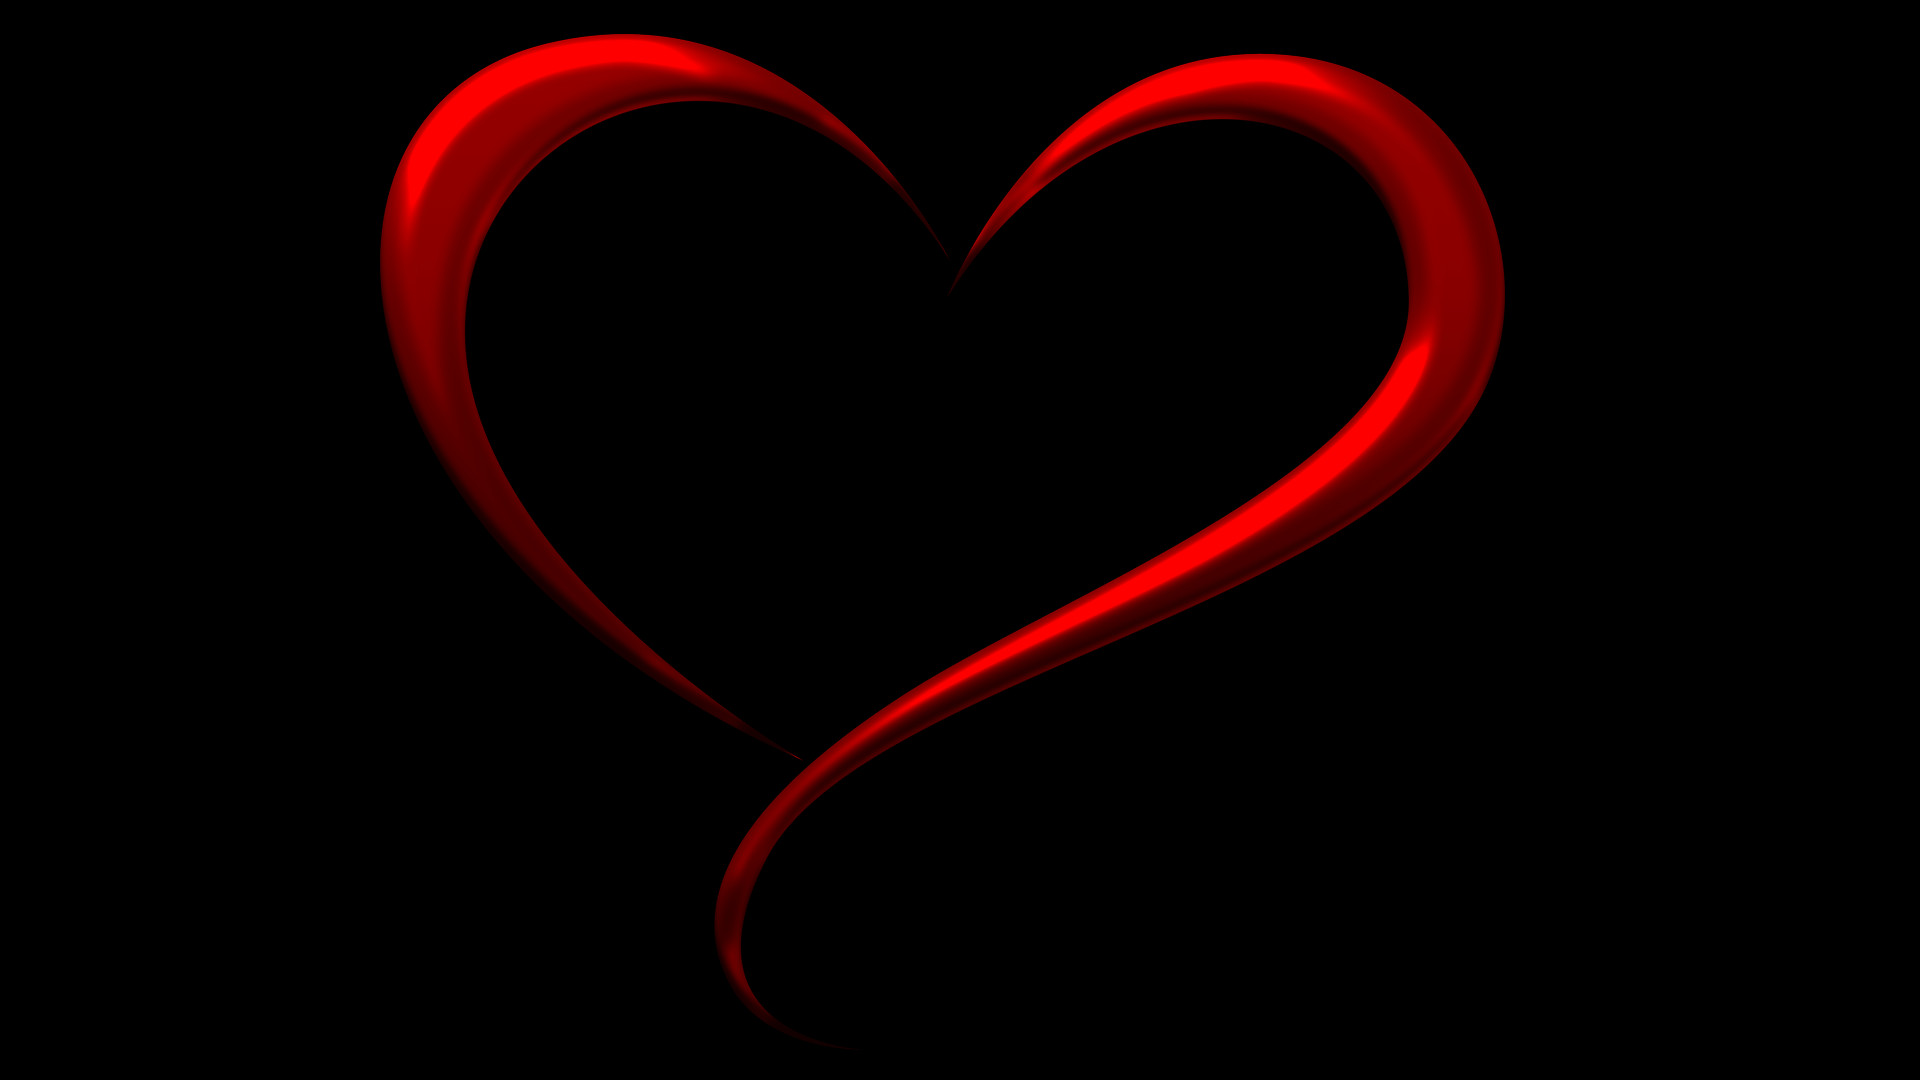 1920x1080 Black and Red Heart HD Wallpaper